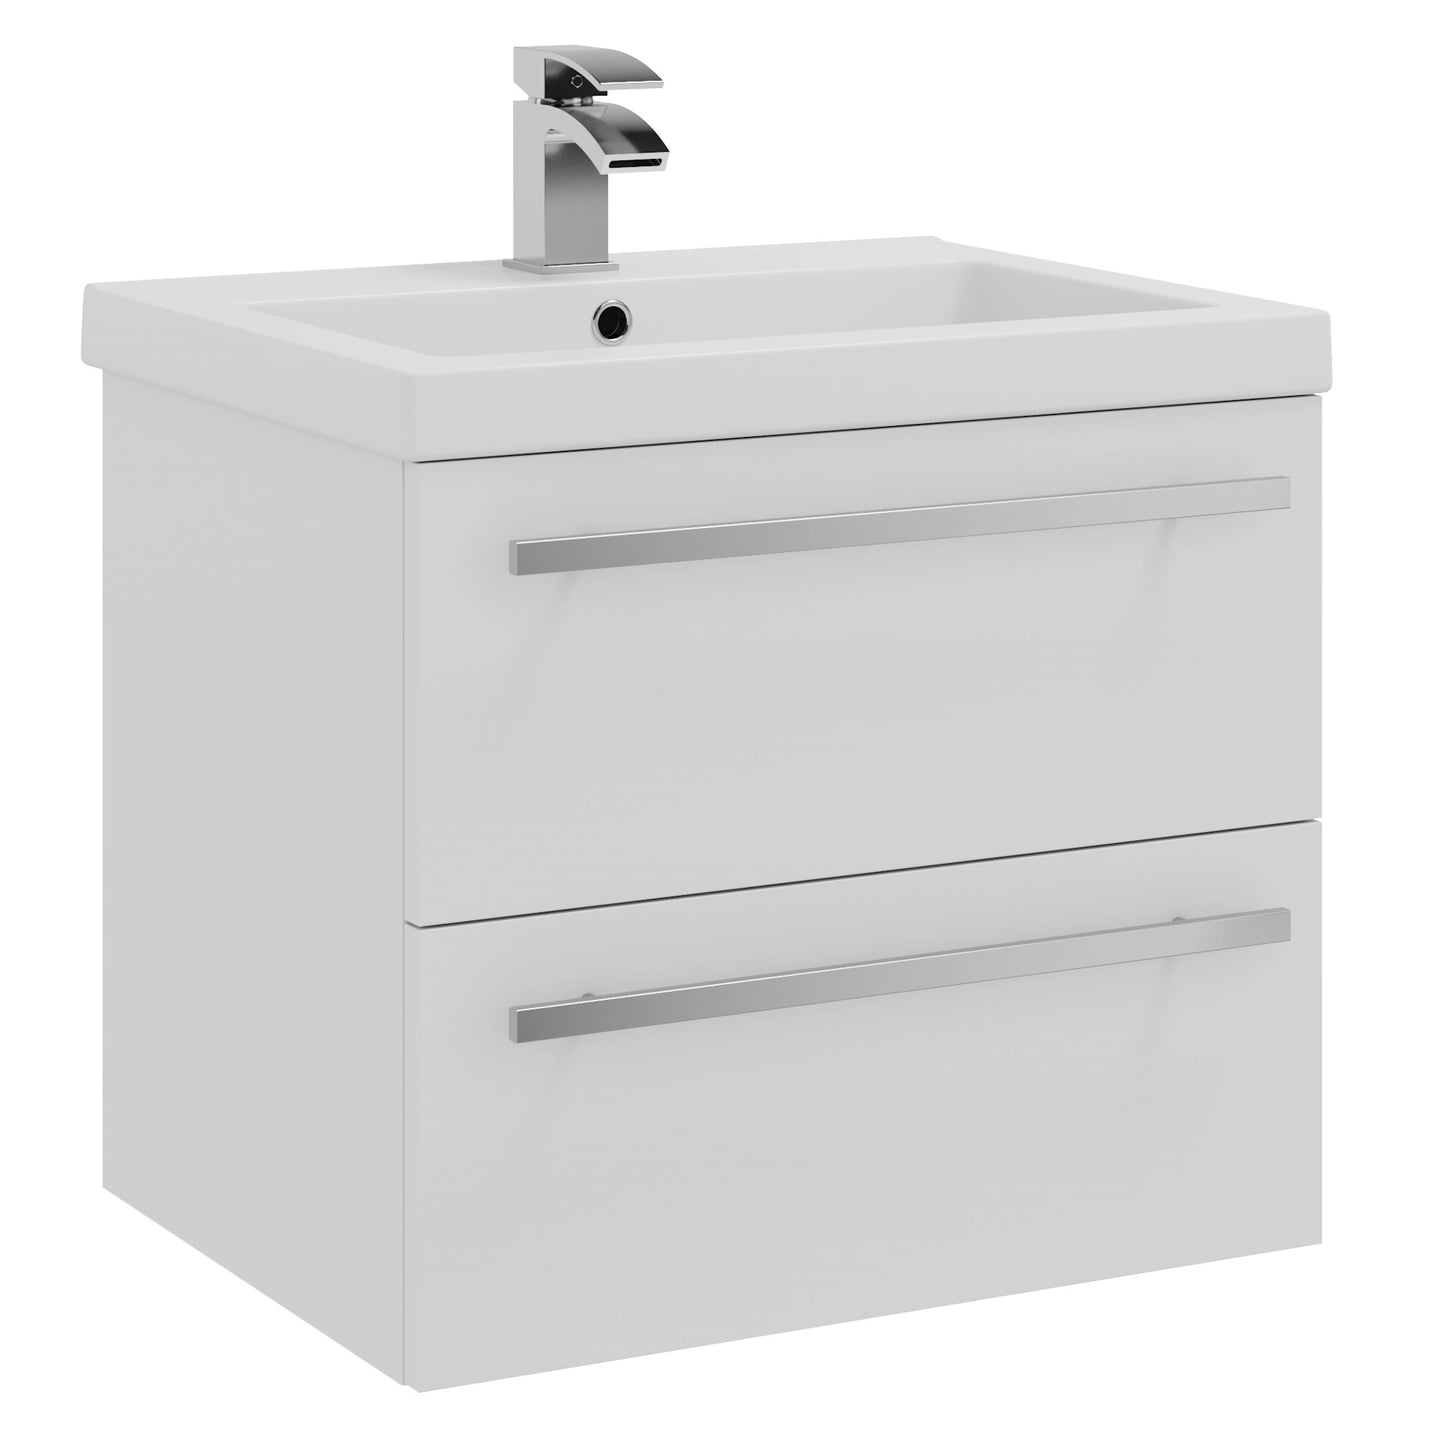 Purity Kartell Wall Mounted Two Drawer 600mm Basin Sink Vanity Unit